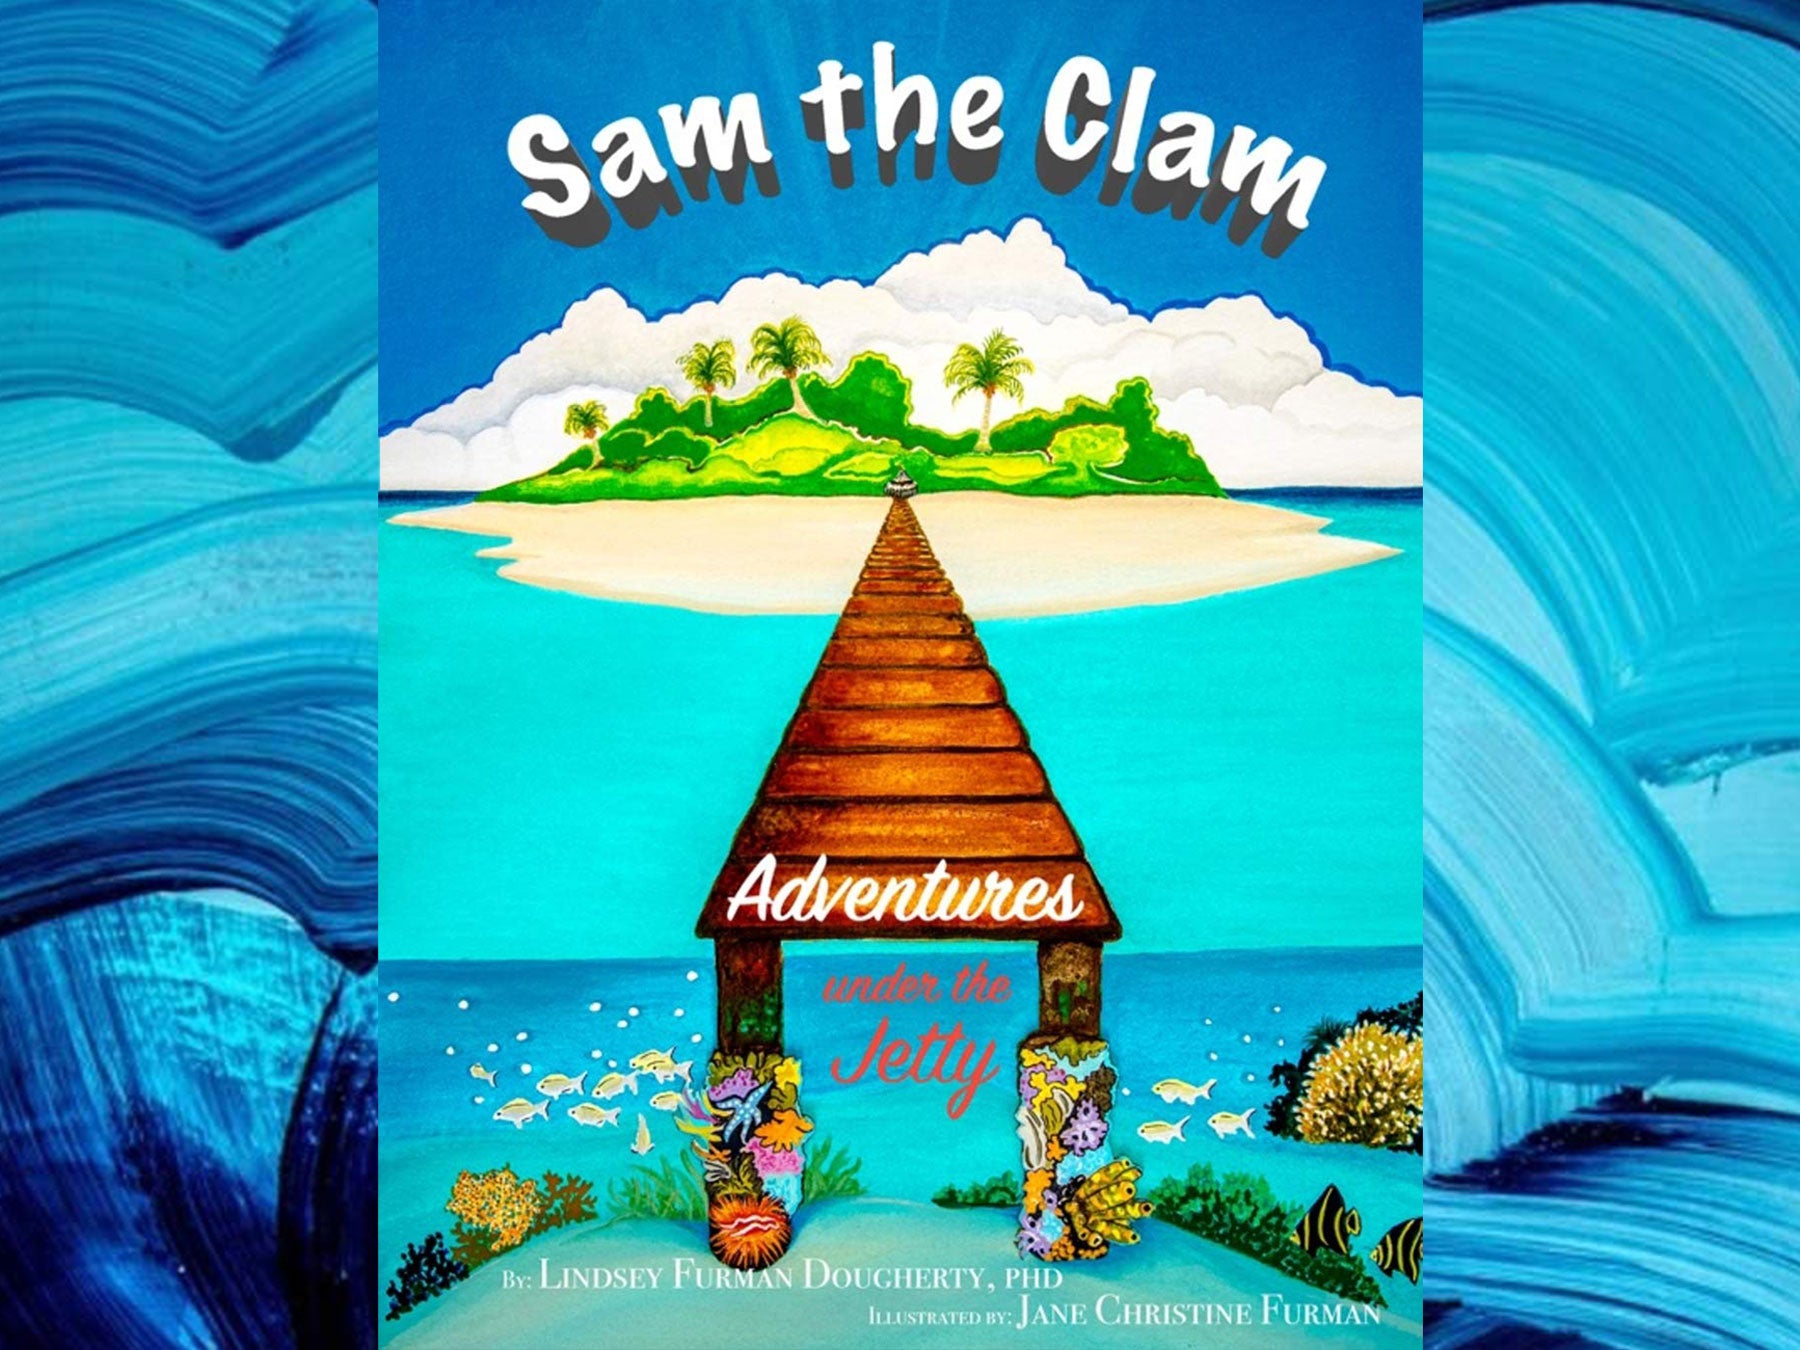 Sam the Clam | A Charming Children's Book by Lindsey Dougherty